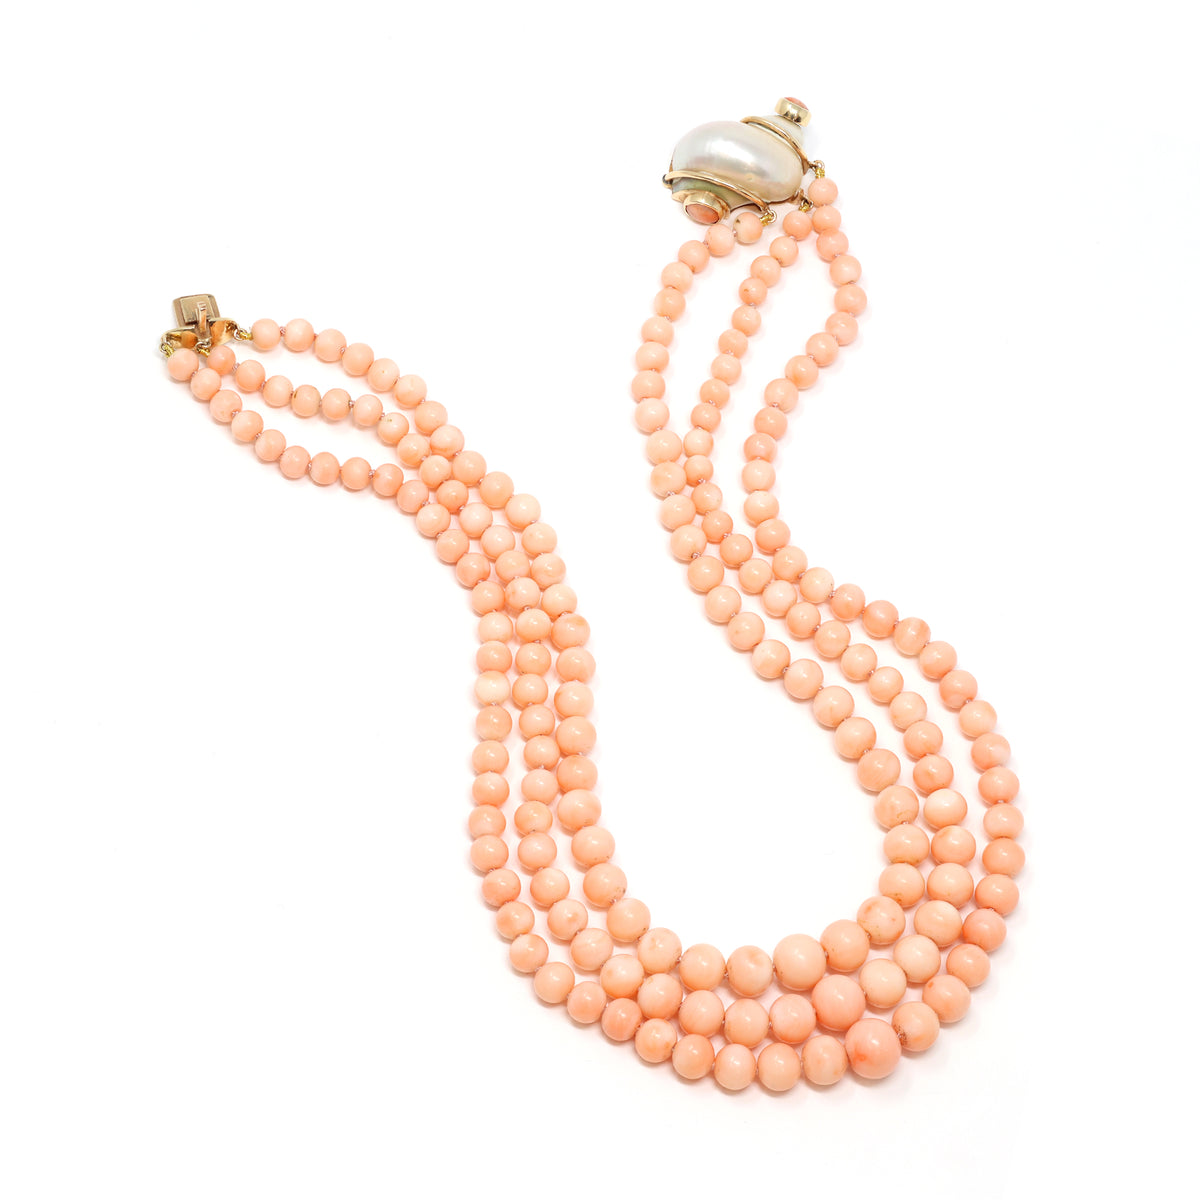 antique-1960s-angel-skin-coral-triple-strand-necklace-with-14-karat-yellow-gold-and-shell-clasp-open-clasp-view-2000x2000